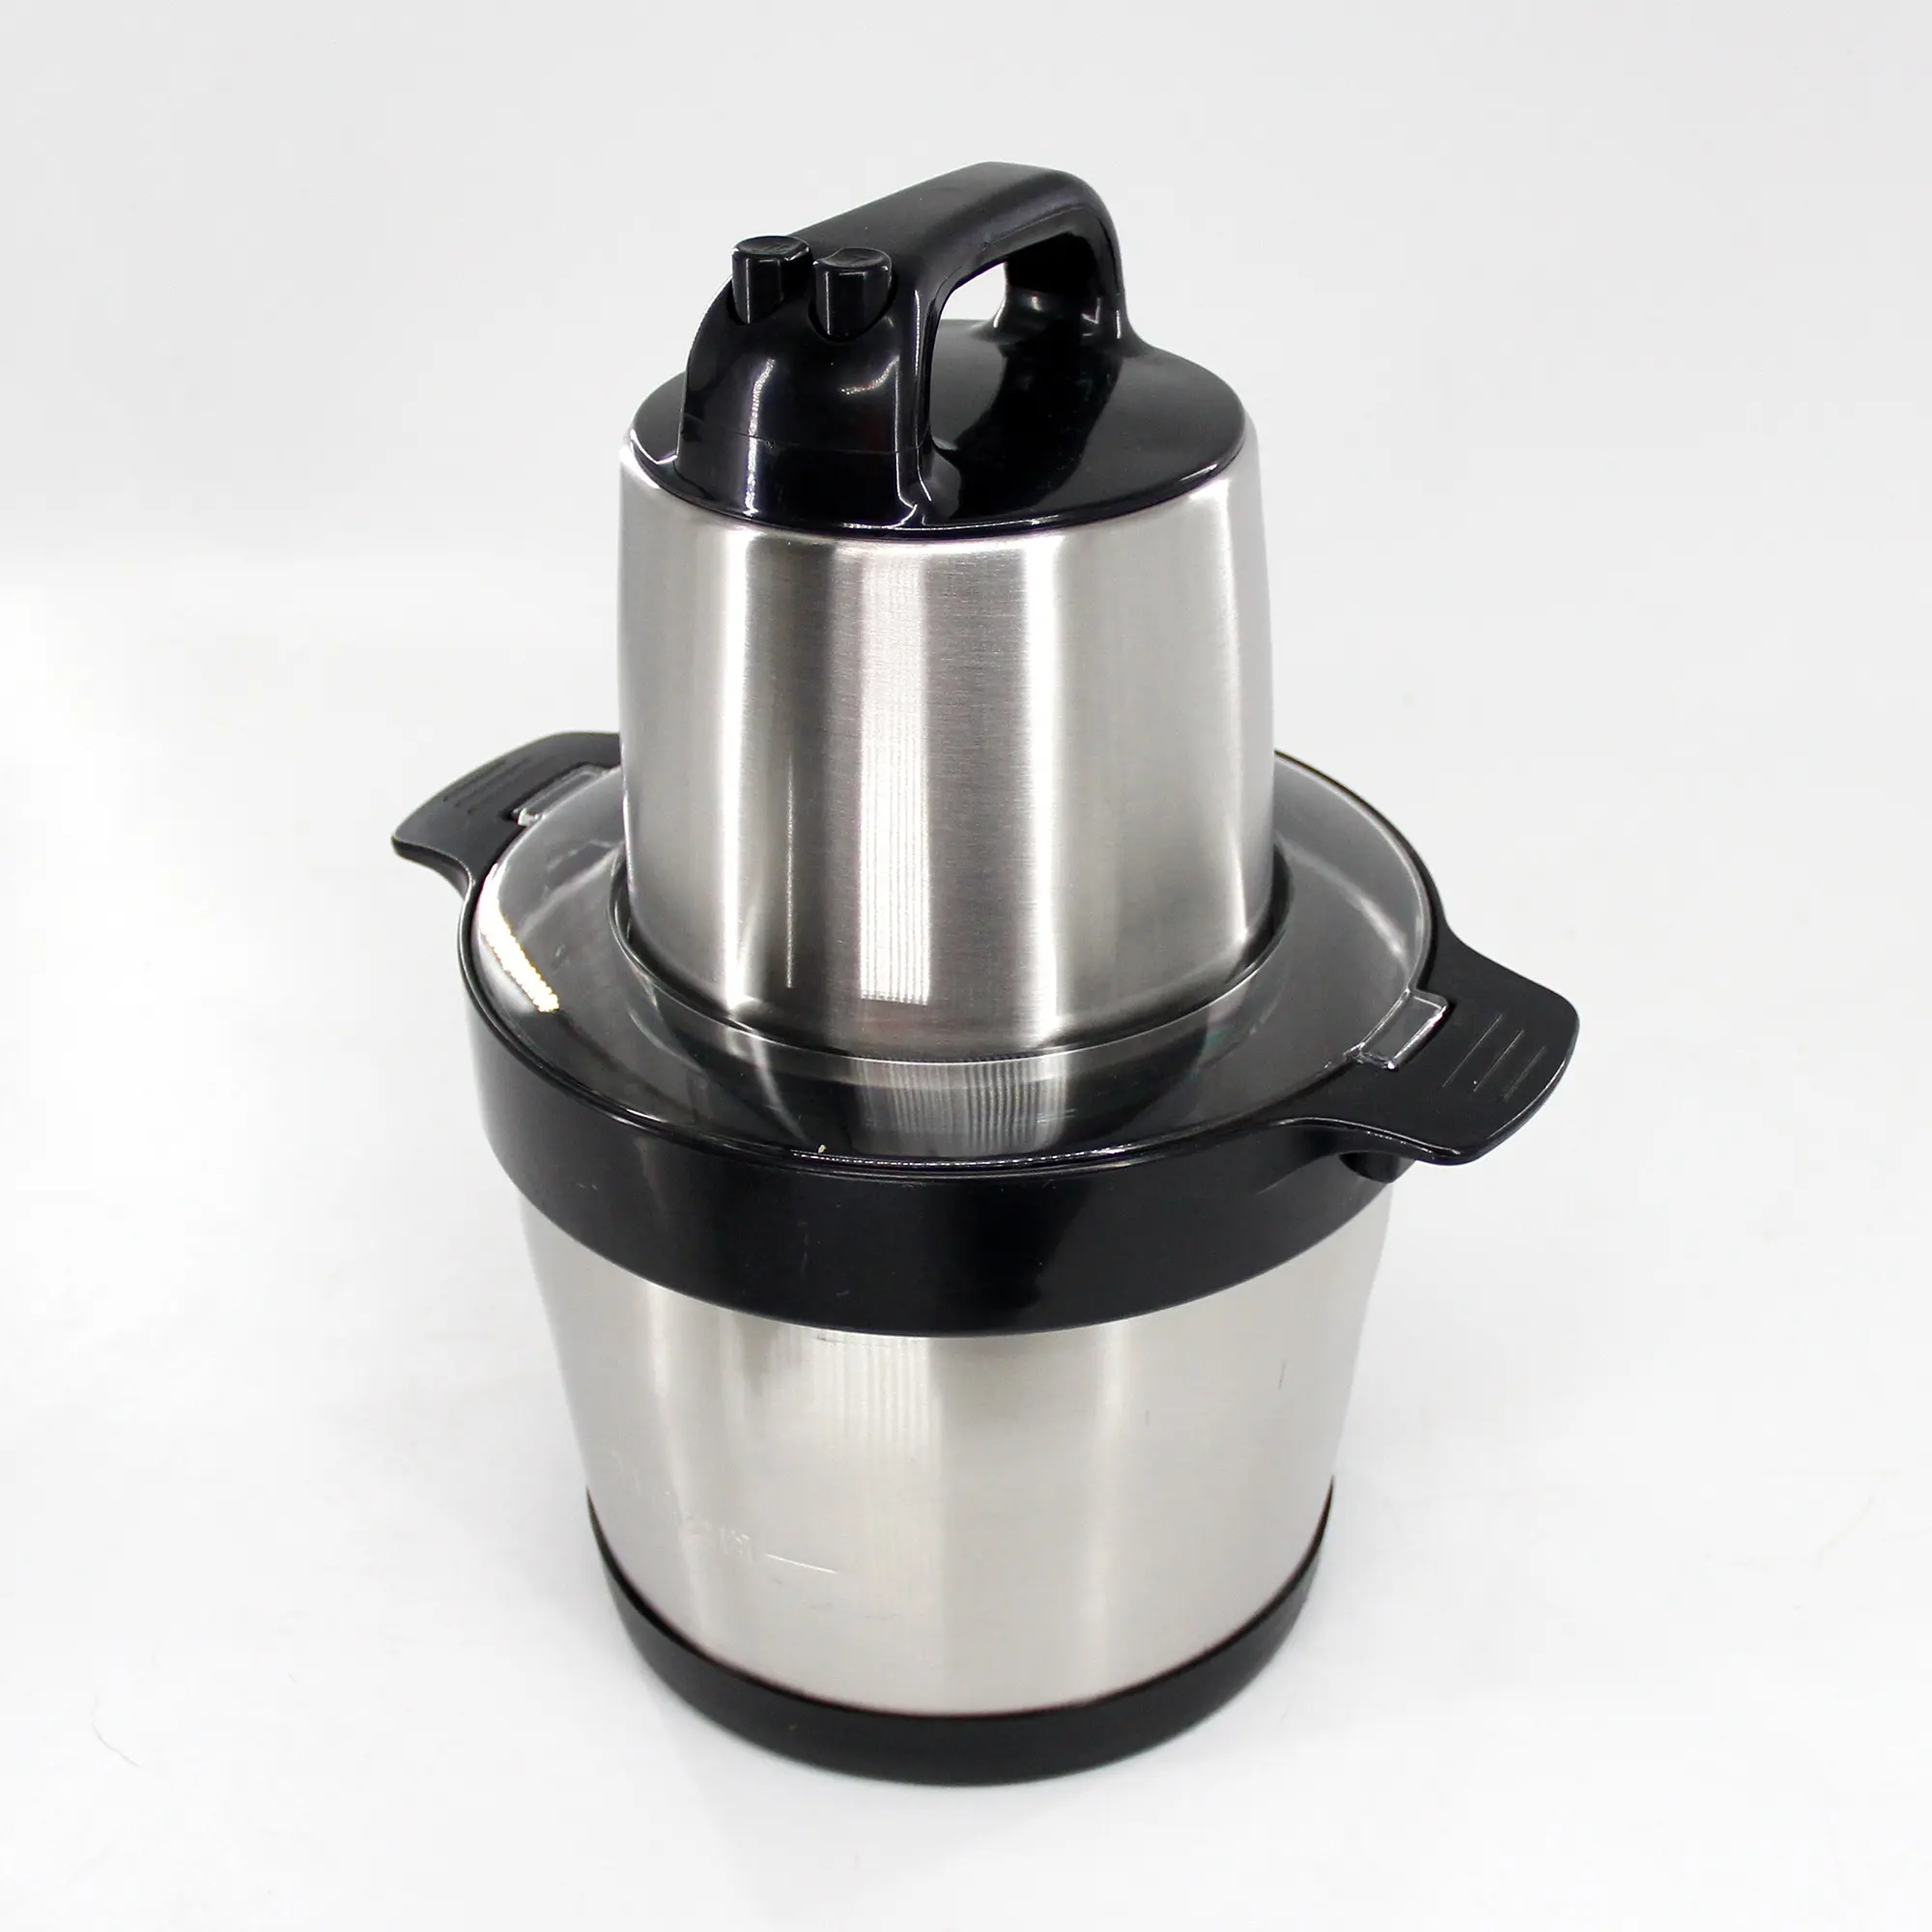 aluminium meat grinder Chopper Electric Automatic Mincing Machine High-quality Grinder Food Processor Stainless Steel